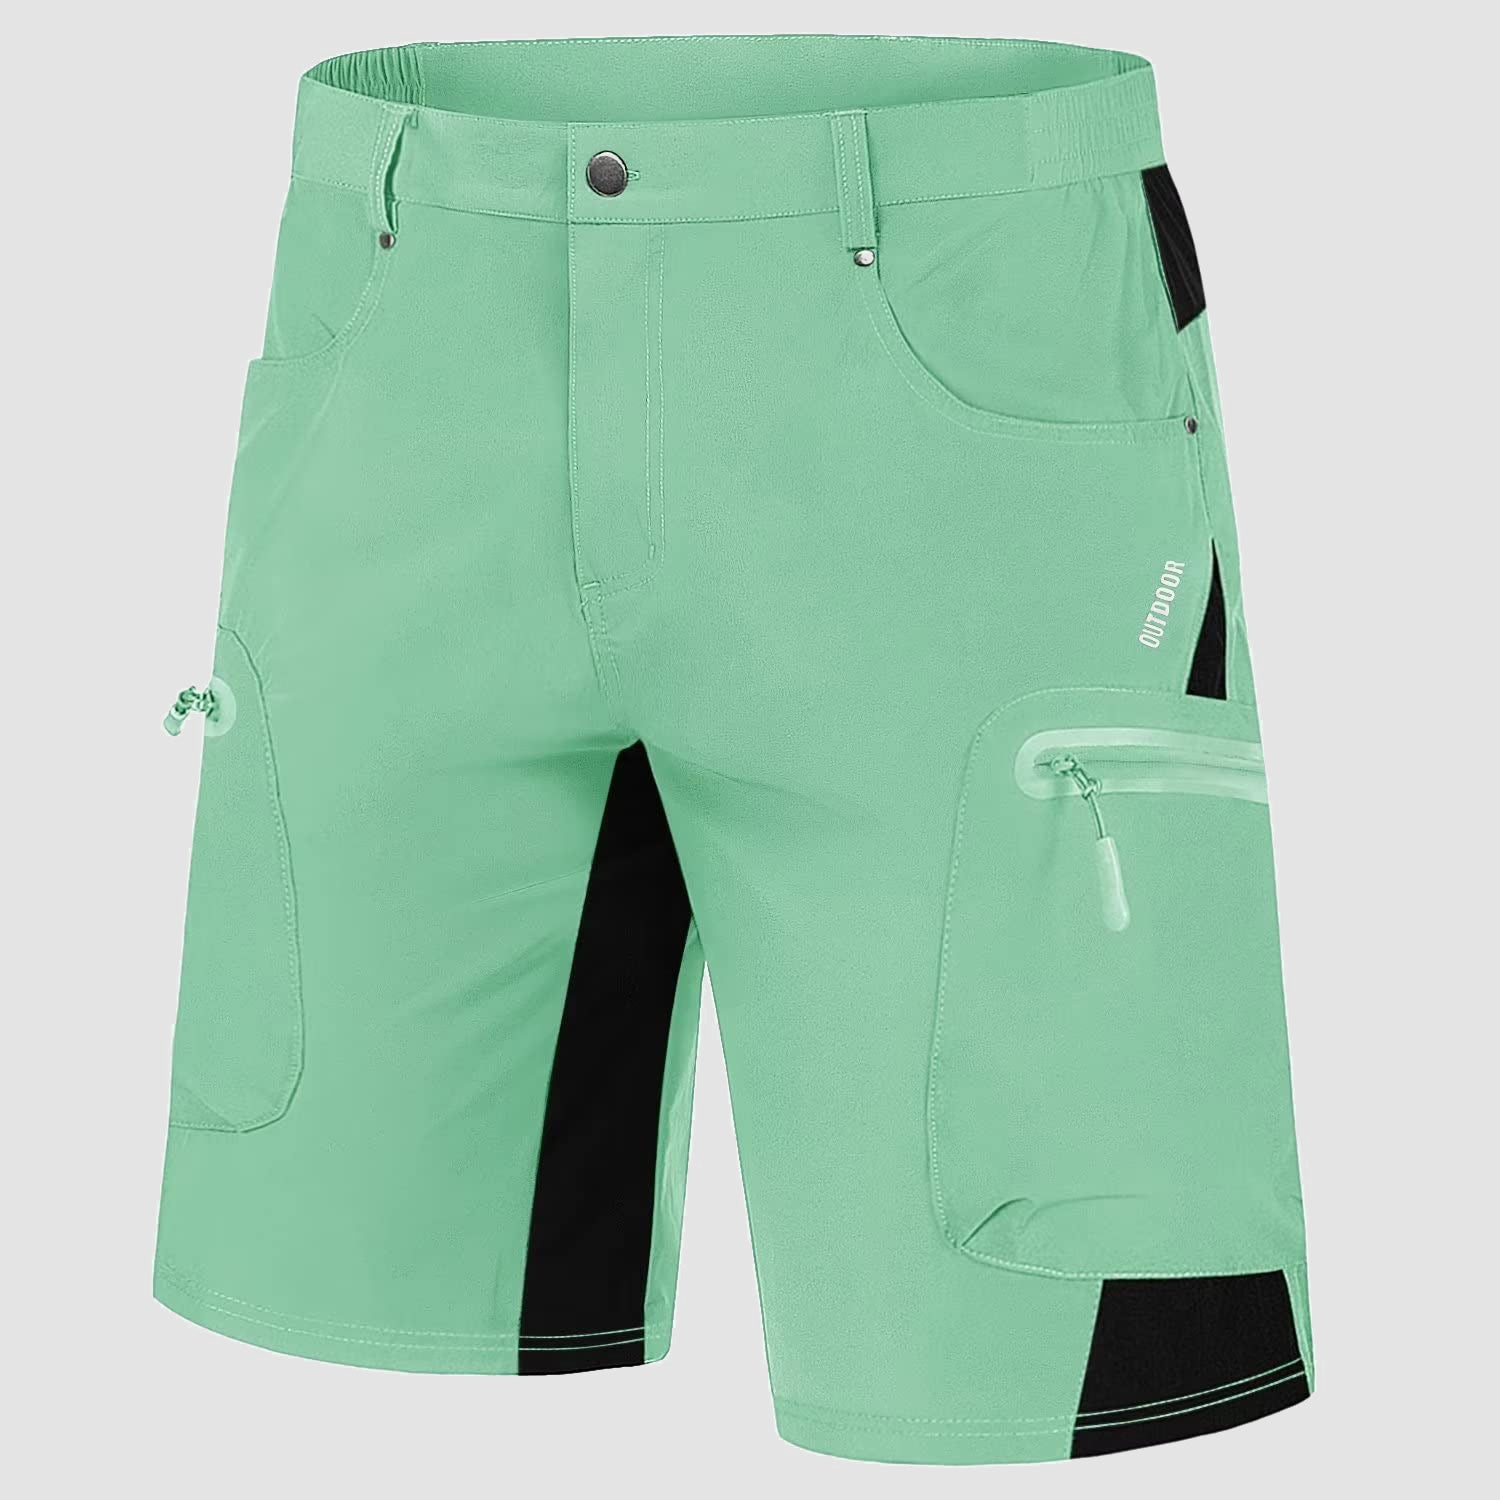 Buy 4 Get the 4th Shorts Qui Ripstop Cargo 5 with – Pockets Free！】Men\'s MAGCOMSEN